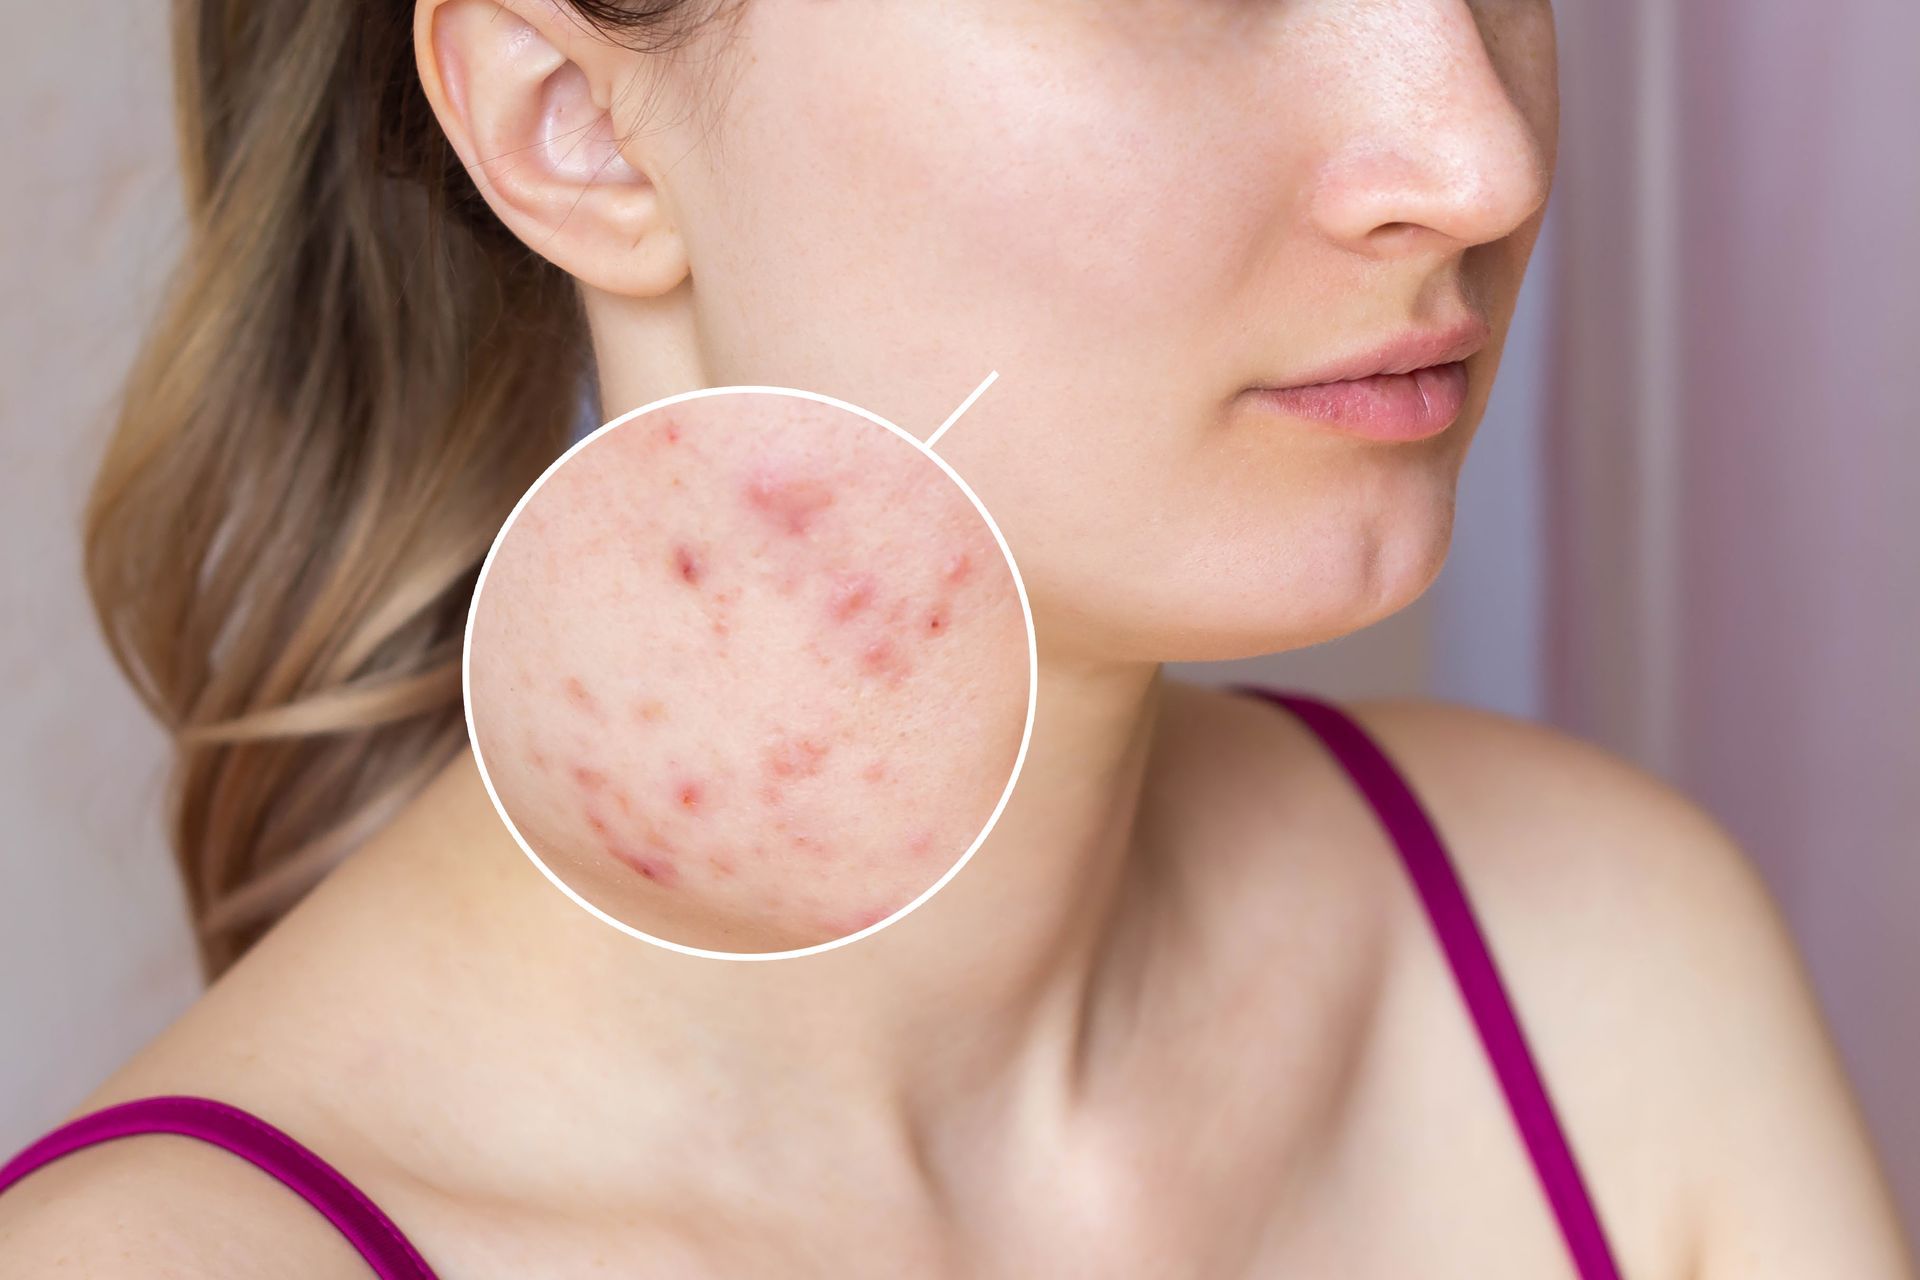 A close up of a woman 's face with acne on it.